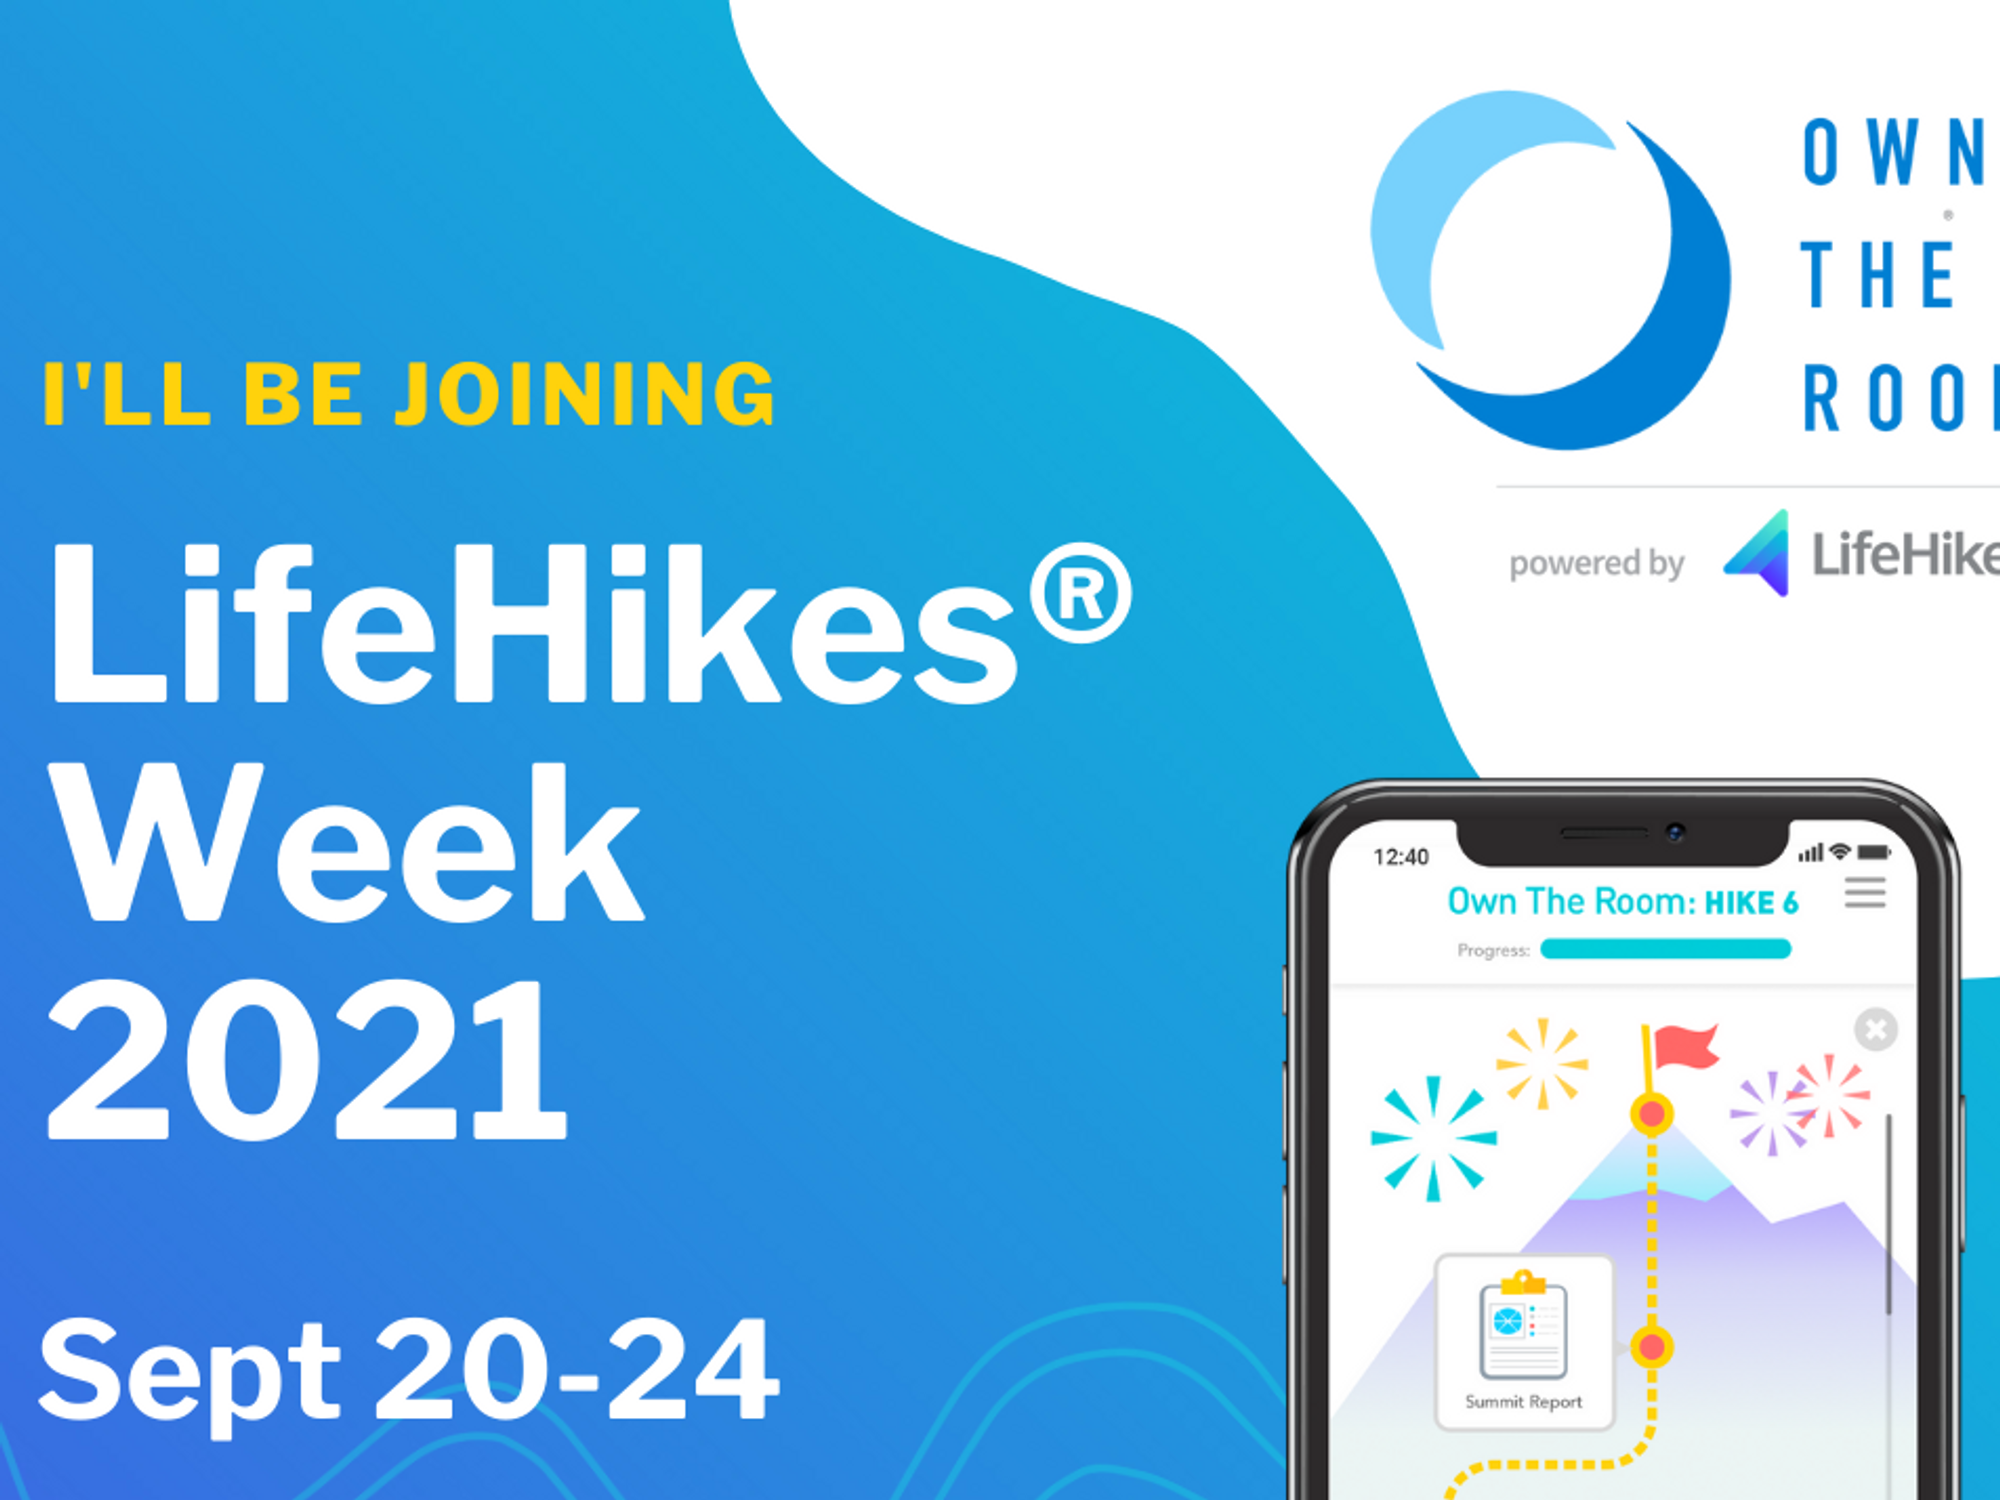 Want To Develop Your Skills? Check Out LifeHikes Week 2021!